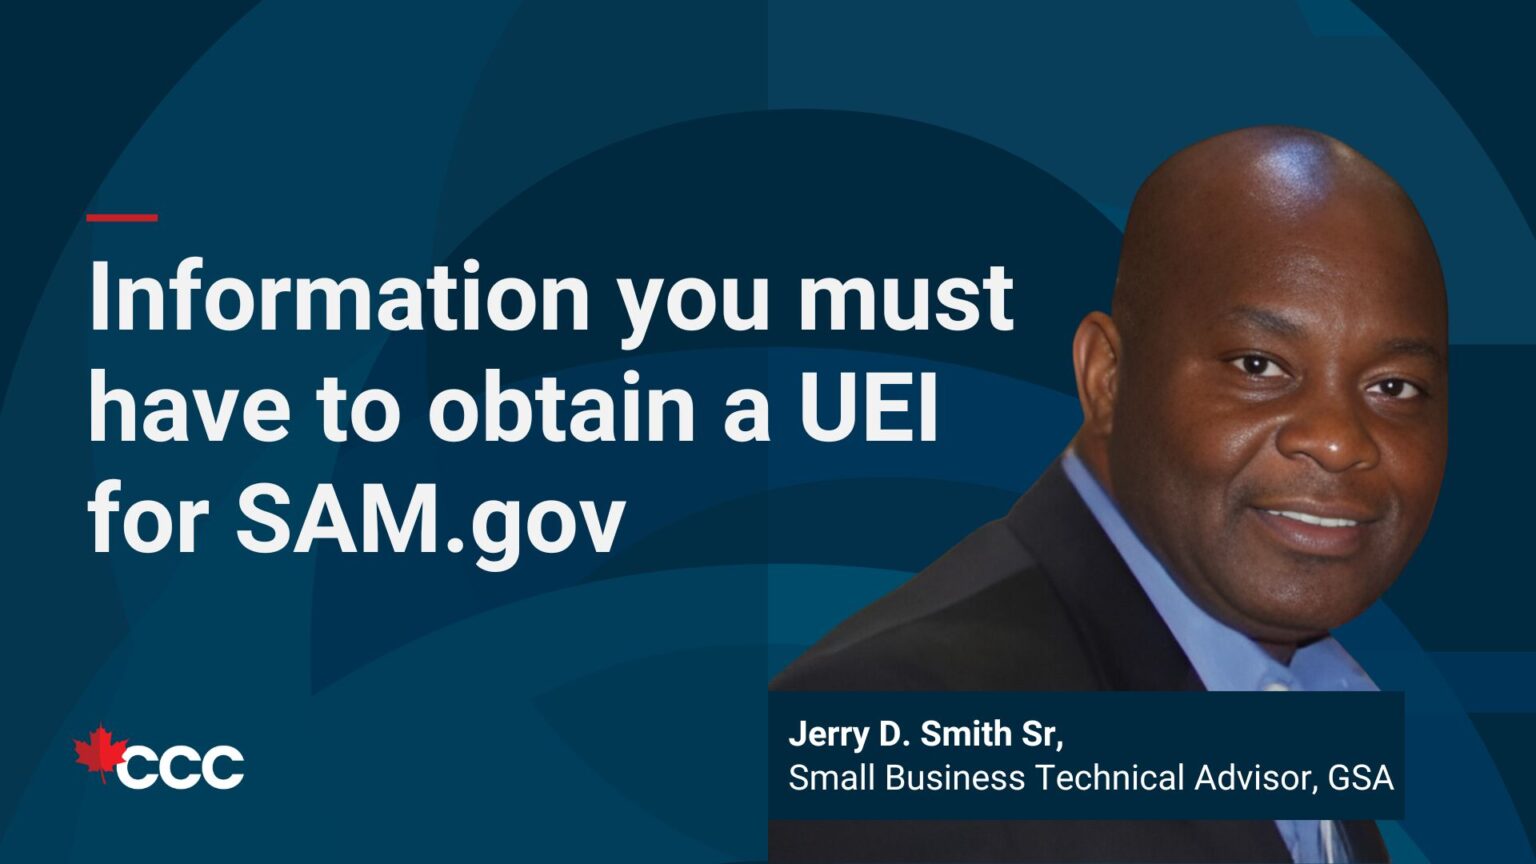 Information you must have to obtain a UEI